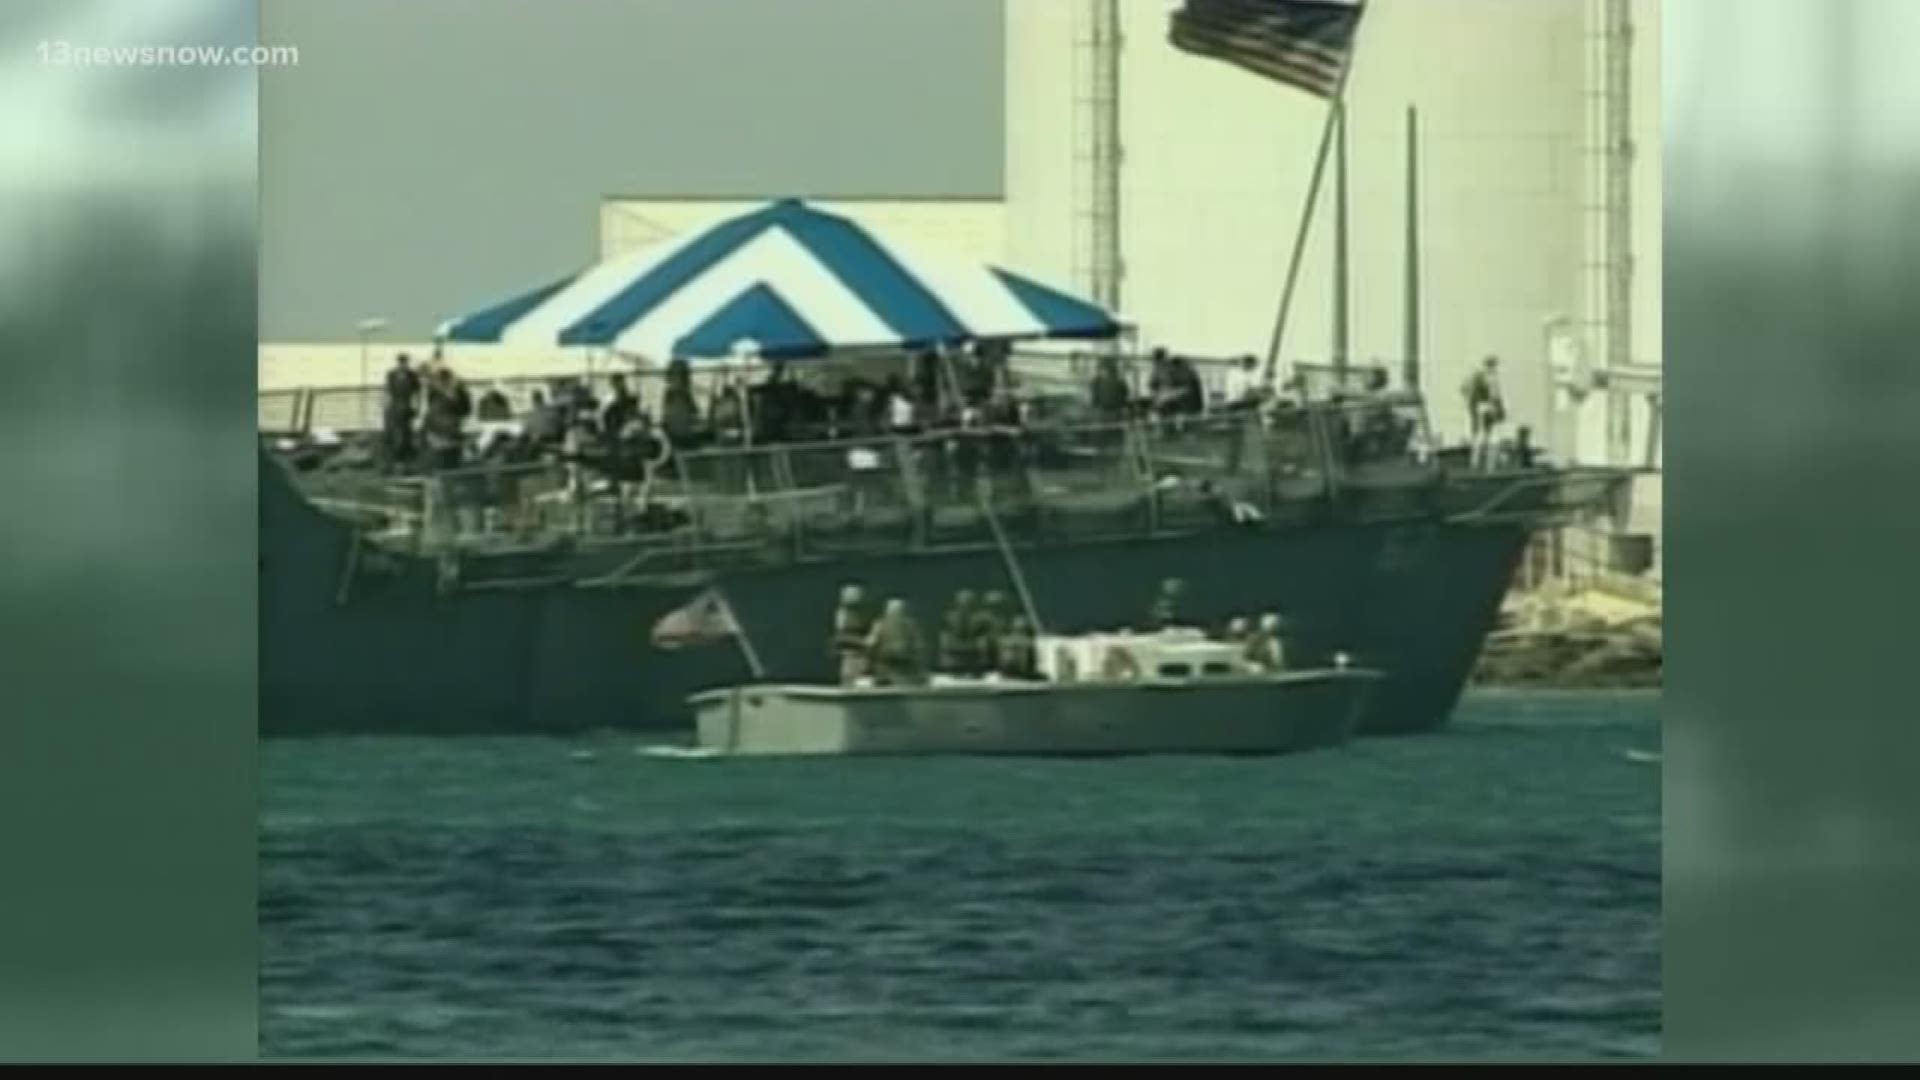 It's been 18 years since the USS Cole attack took 17 sailors lives.